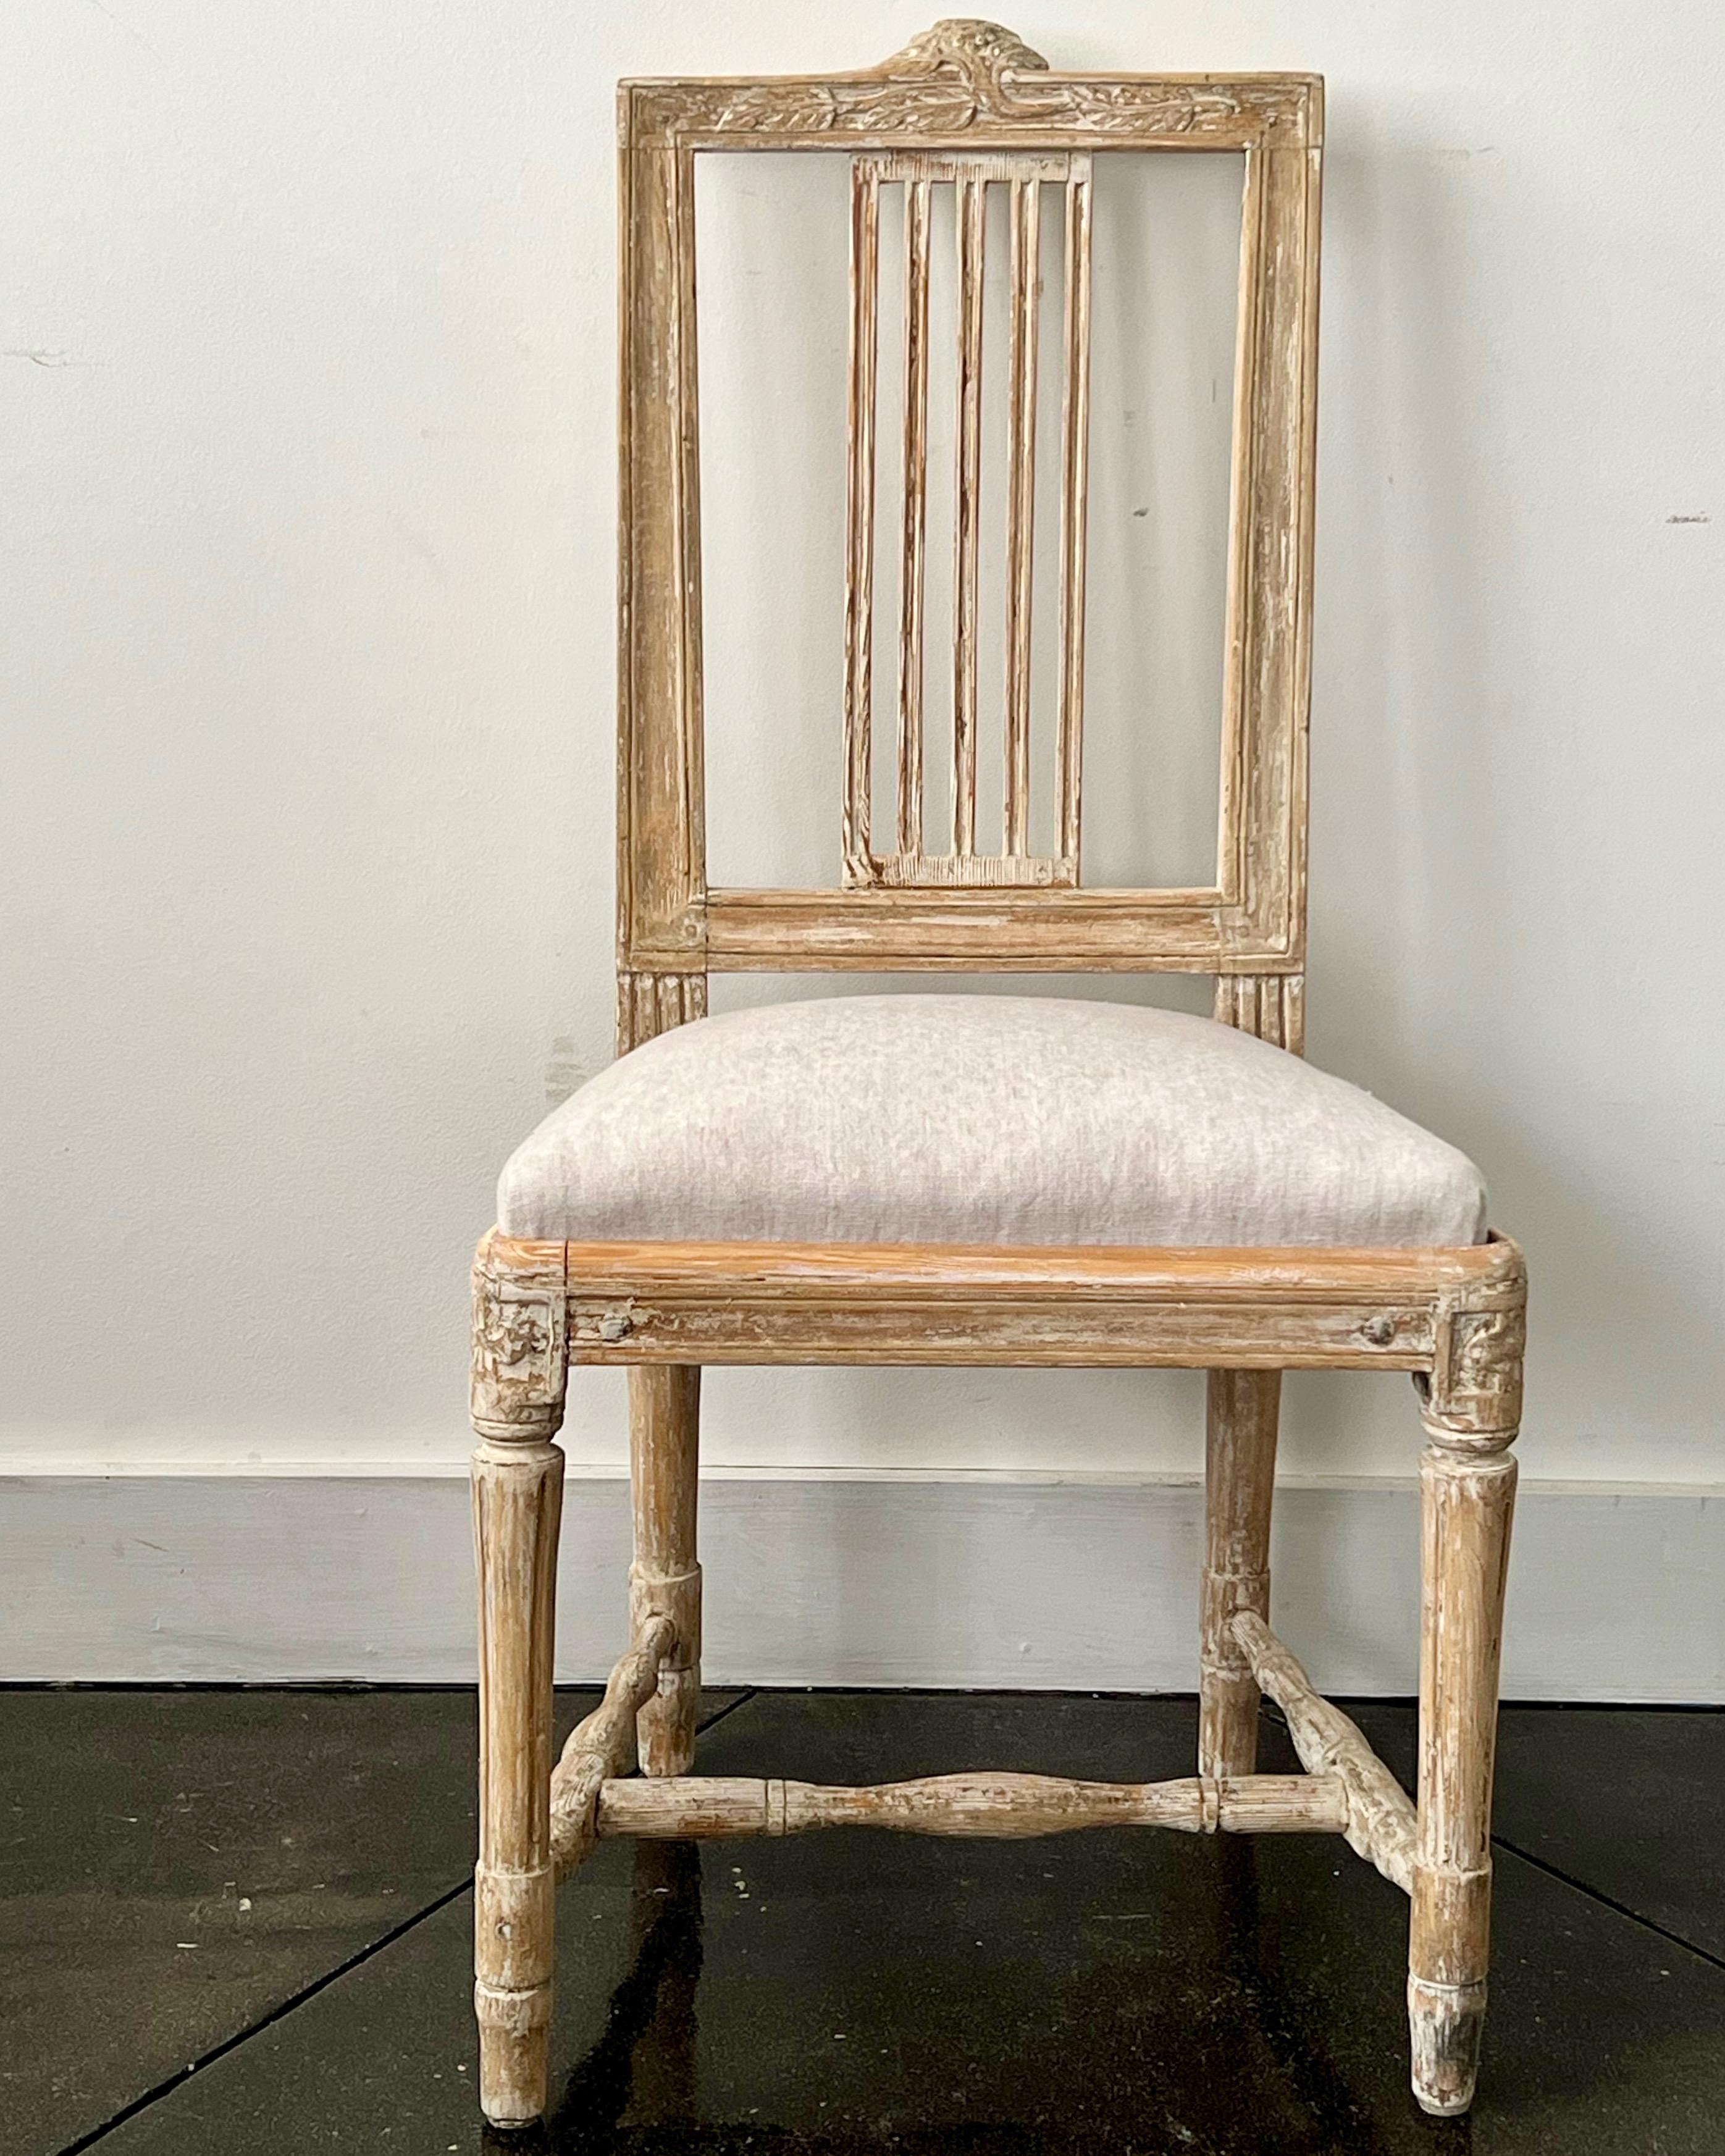 Gustavian period side chair, having the signature fruit and flower carving of the hops plant used by Lindome furniture makers. Hand scraped to the most original color and seat upholstered in pales of pale grey linen.

NOTE:
We have other 18th